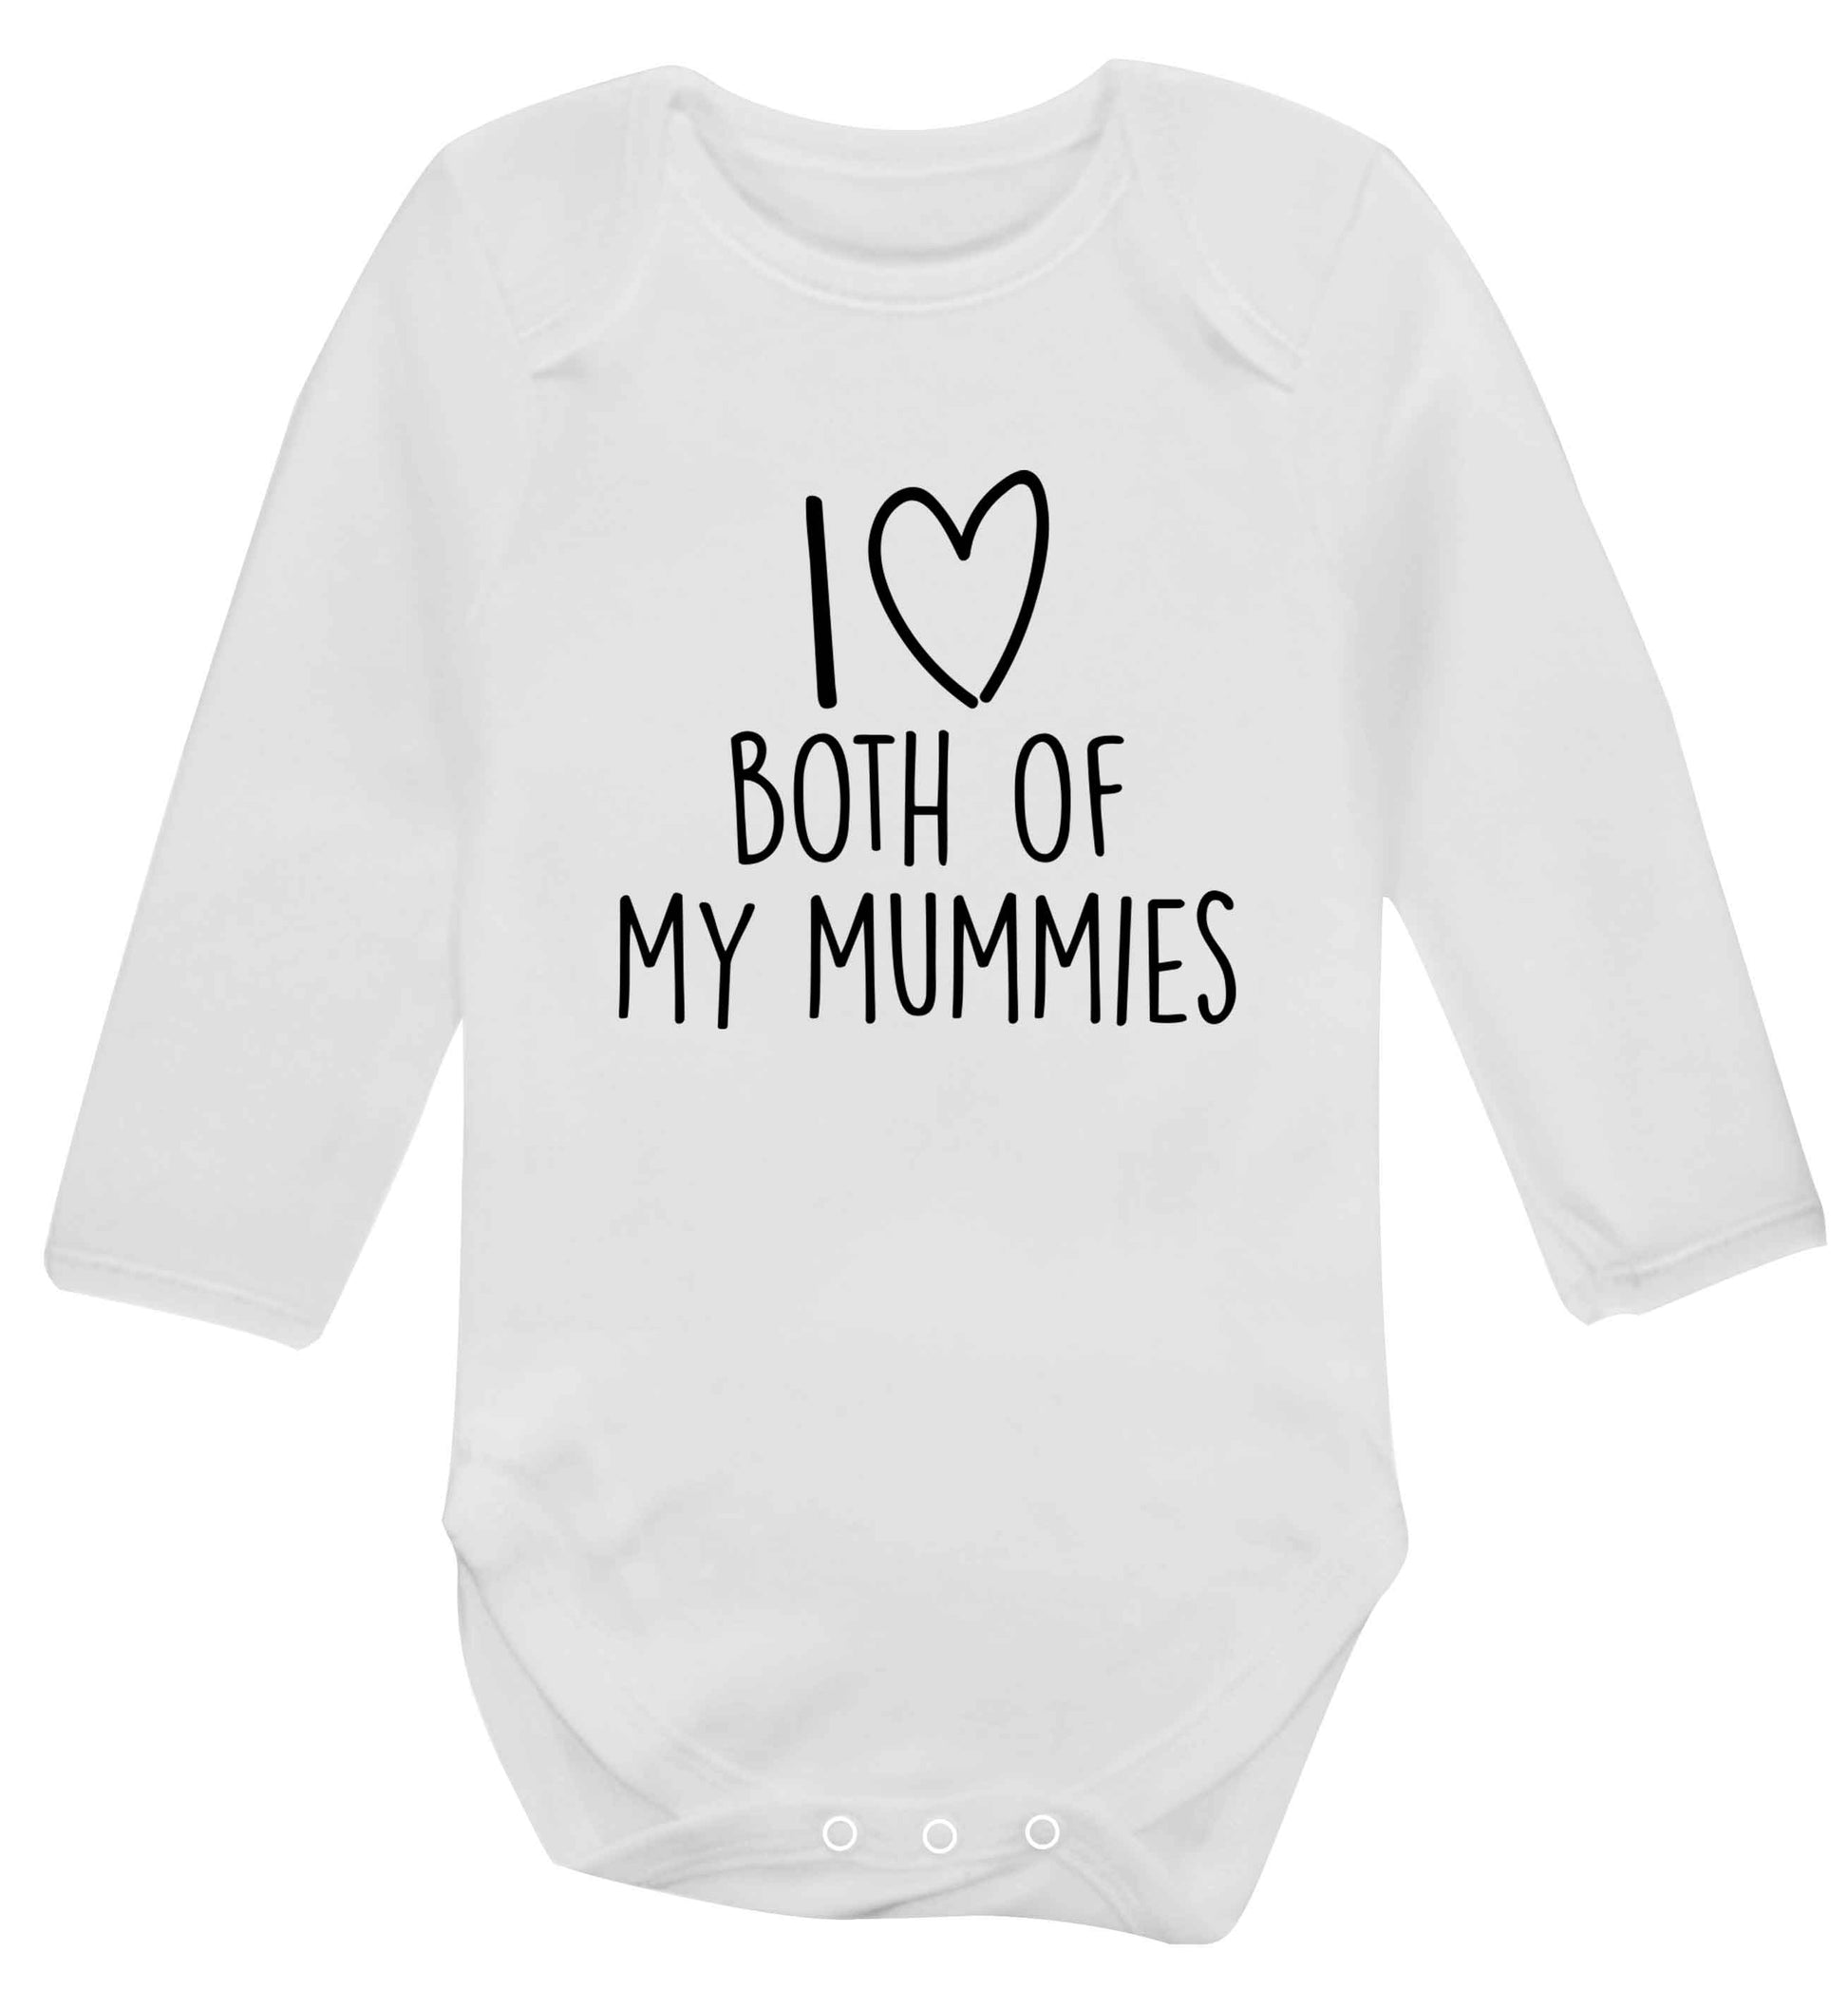 I love both of my mummies baby vest long sleeved white 6-12 months